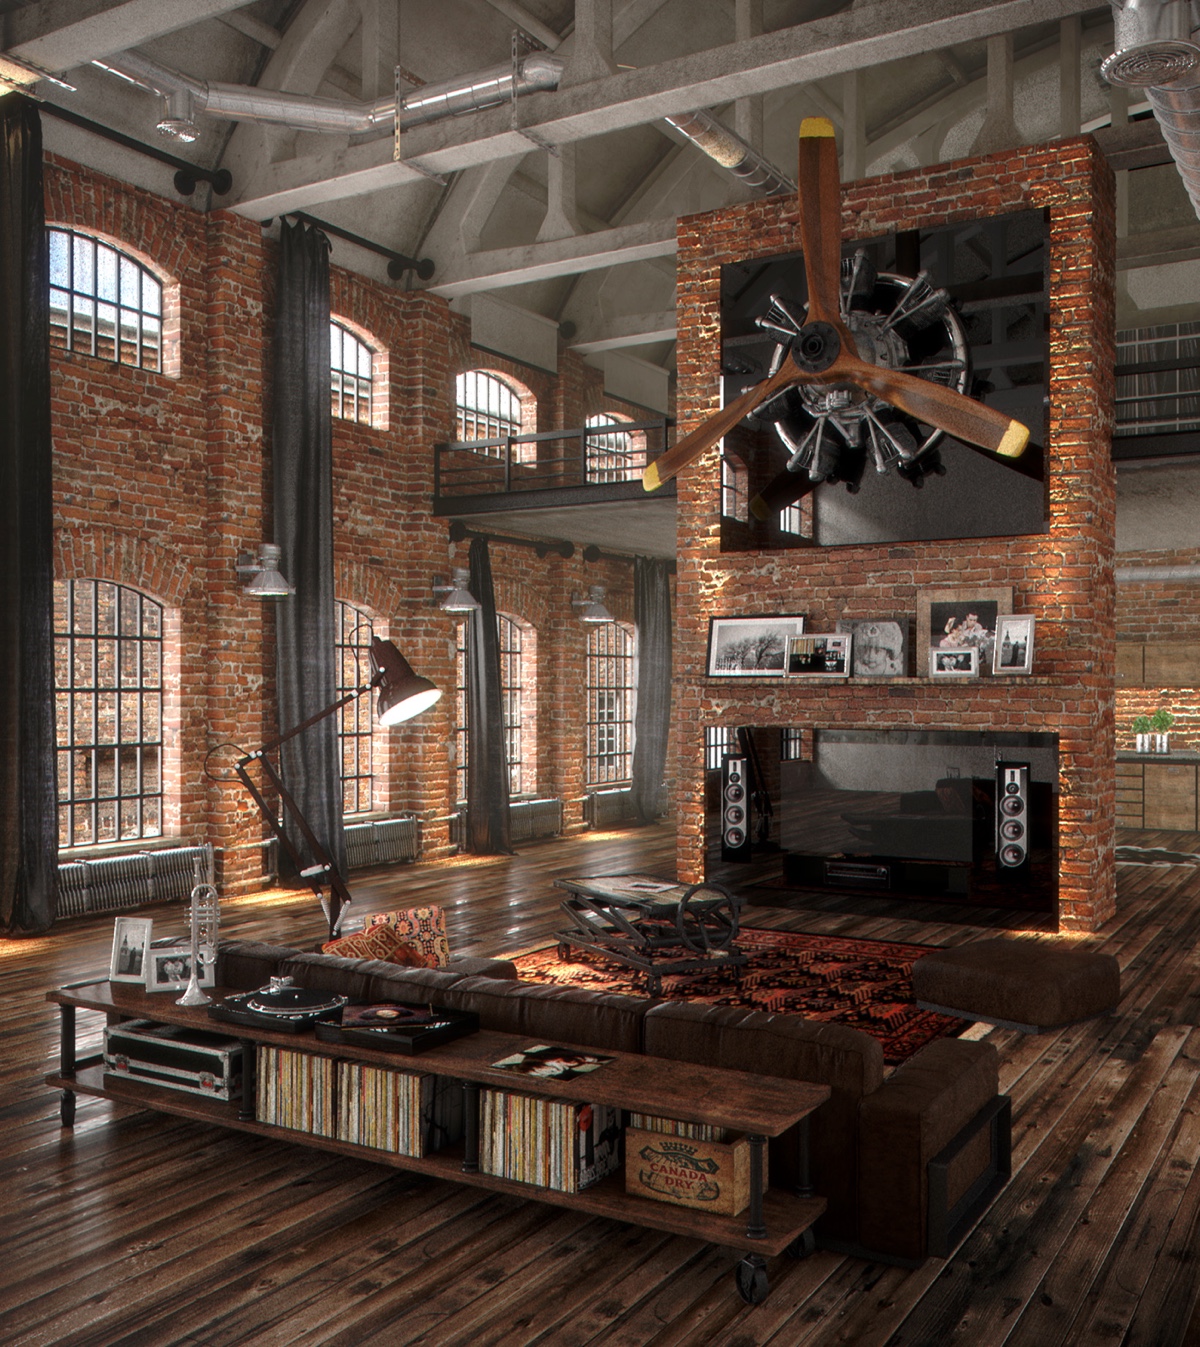 Industrial Style For Living Room Design Apply with Concrete, Brick, and